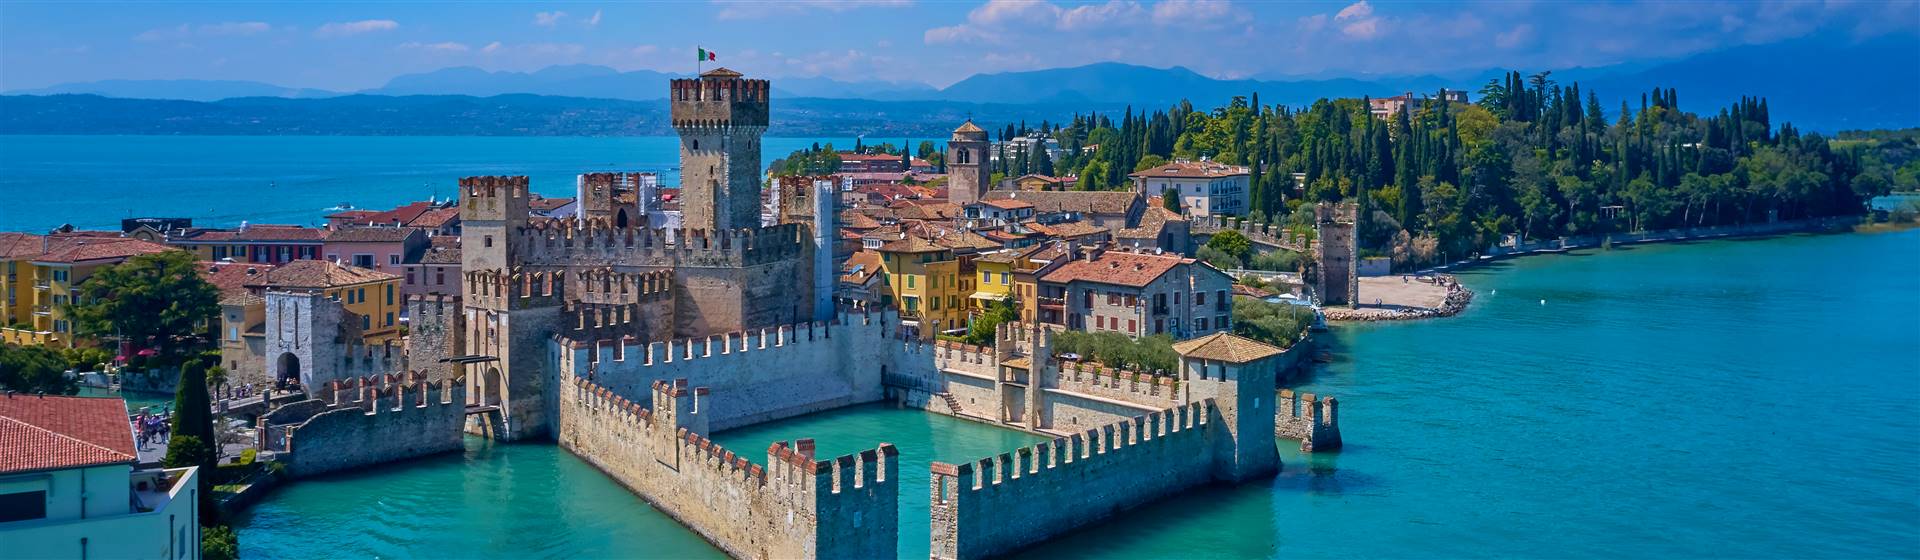 Sirmione, one of Lake Garda's oldest and most popular resorts 